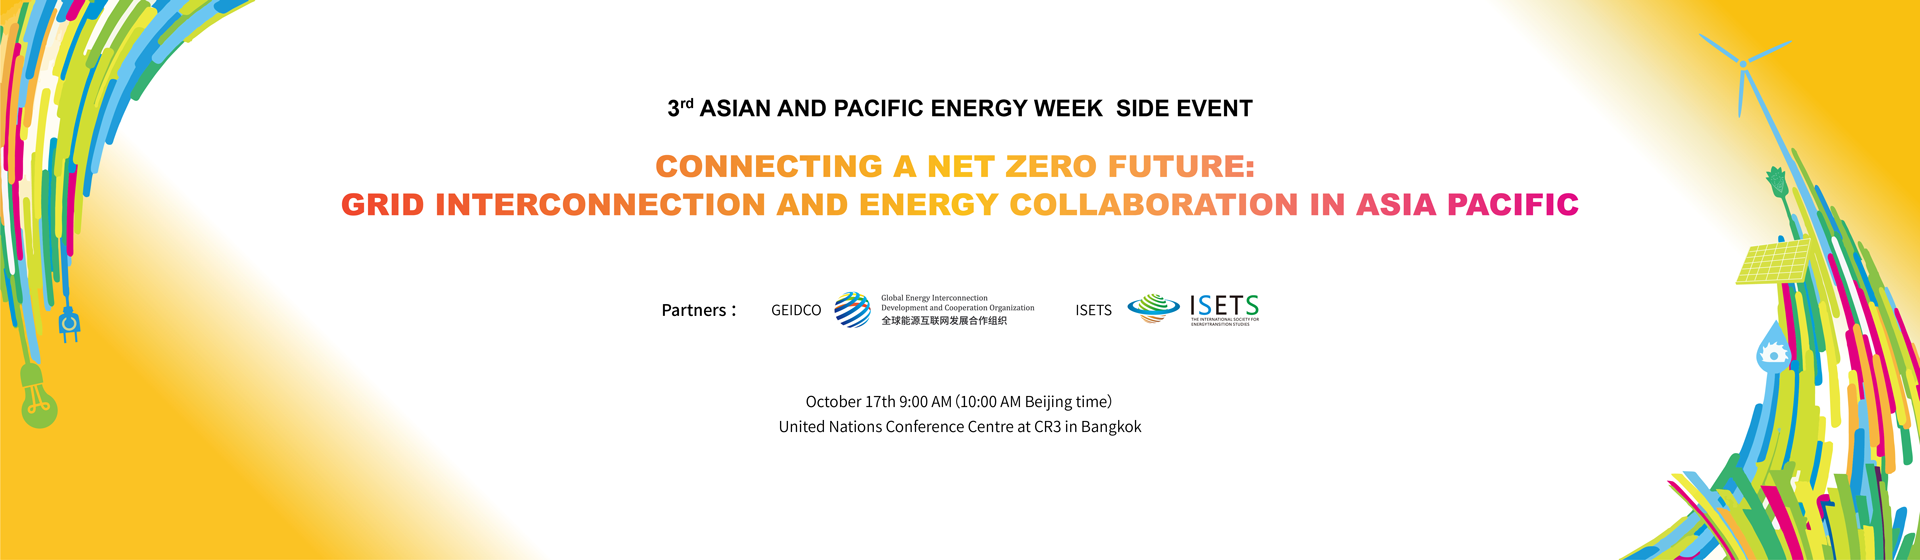 Connecting a Net Zero Future: Grid interconnection and Energy Collaboration in Asia Pacific